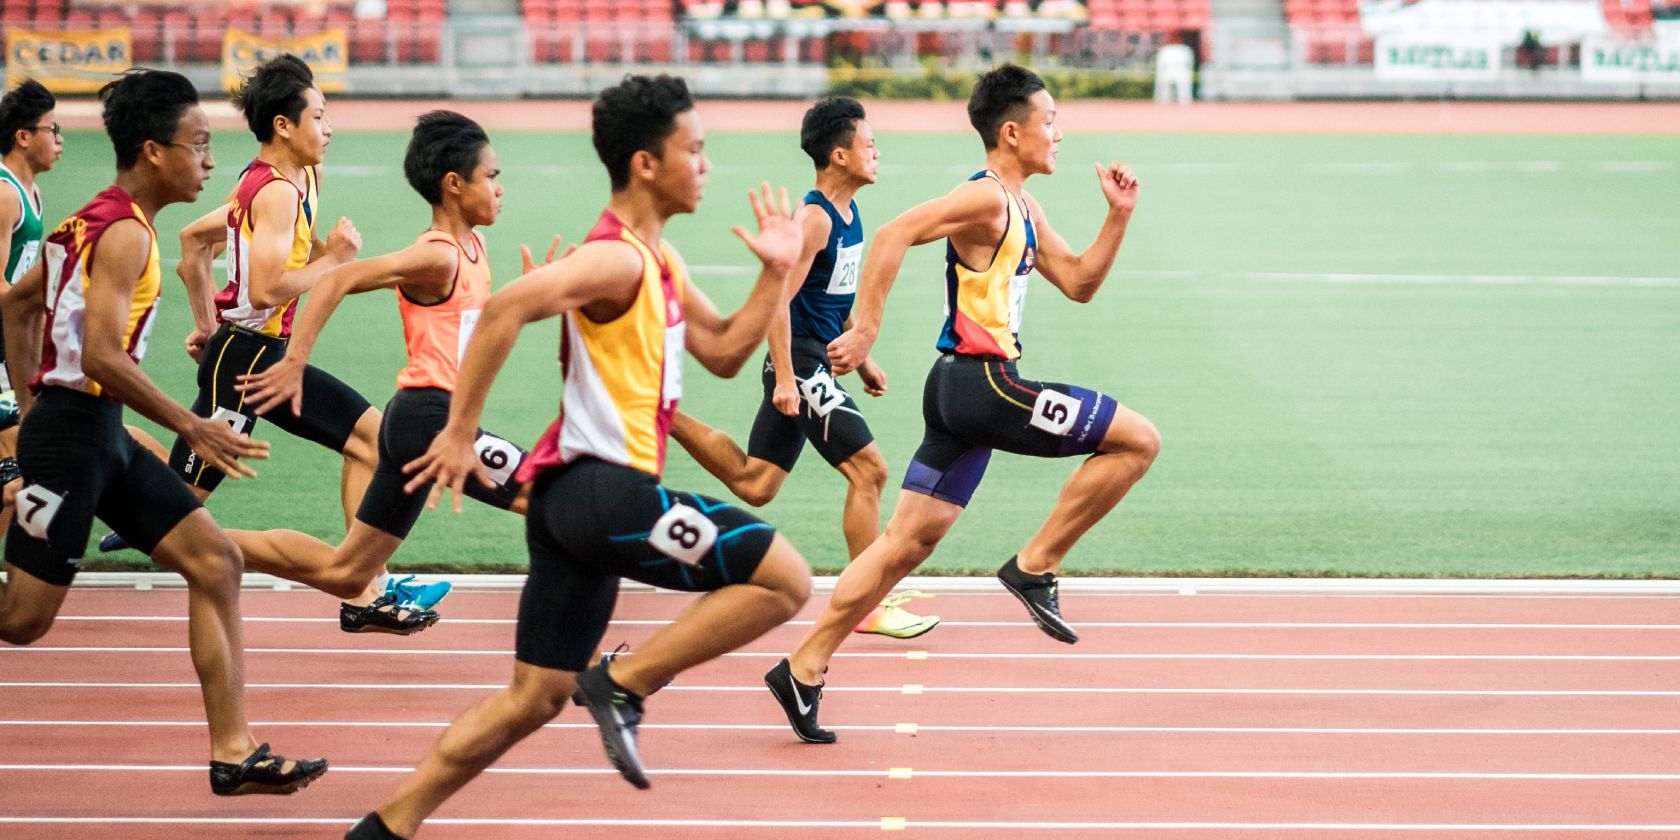 Side view of runners on a track